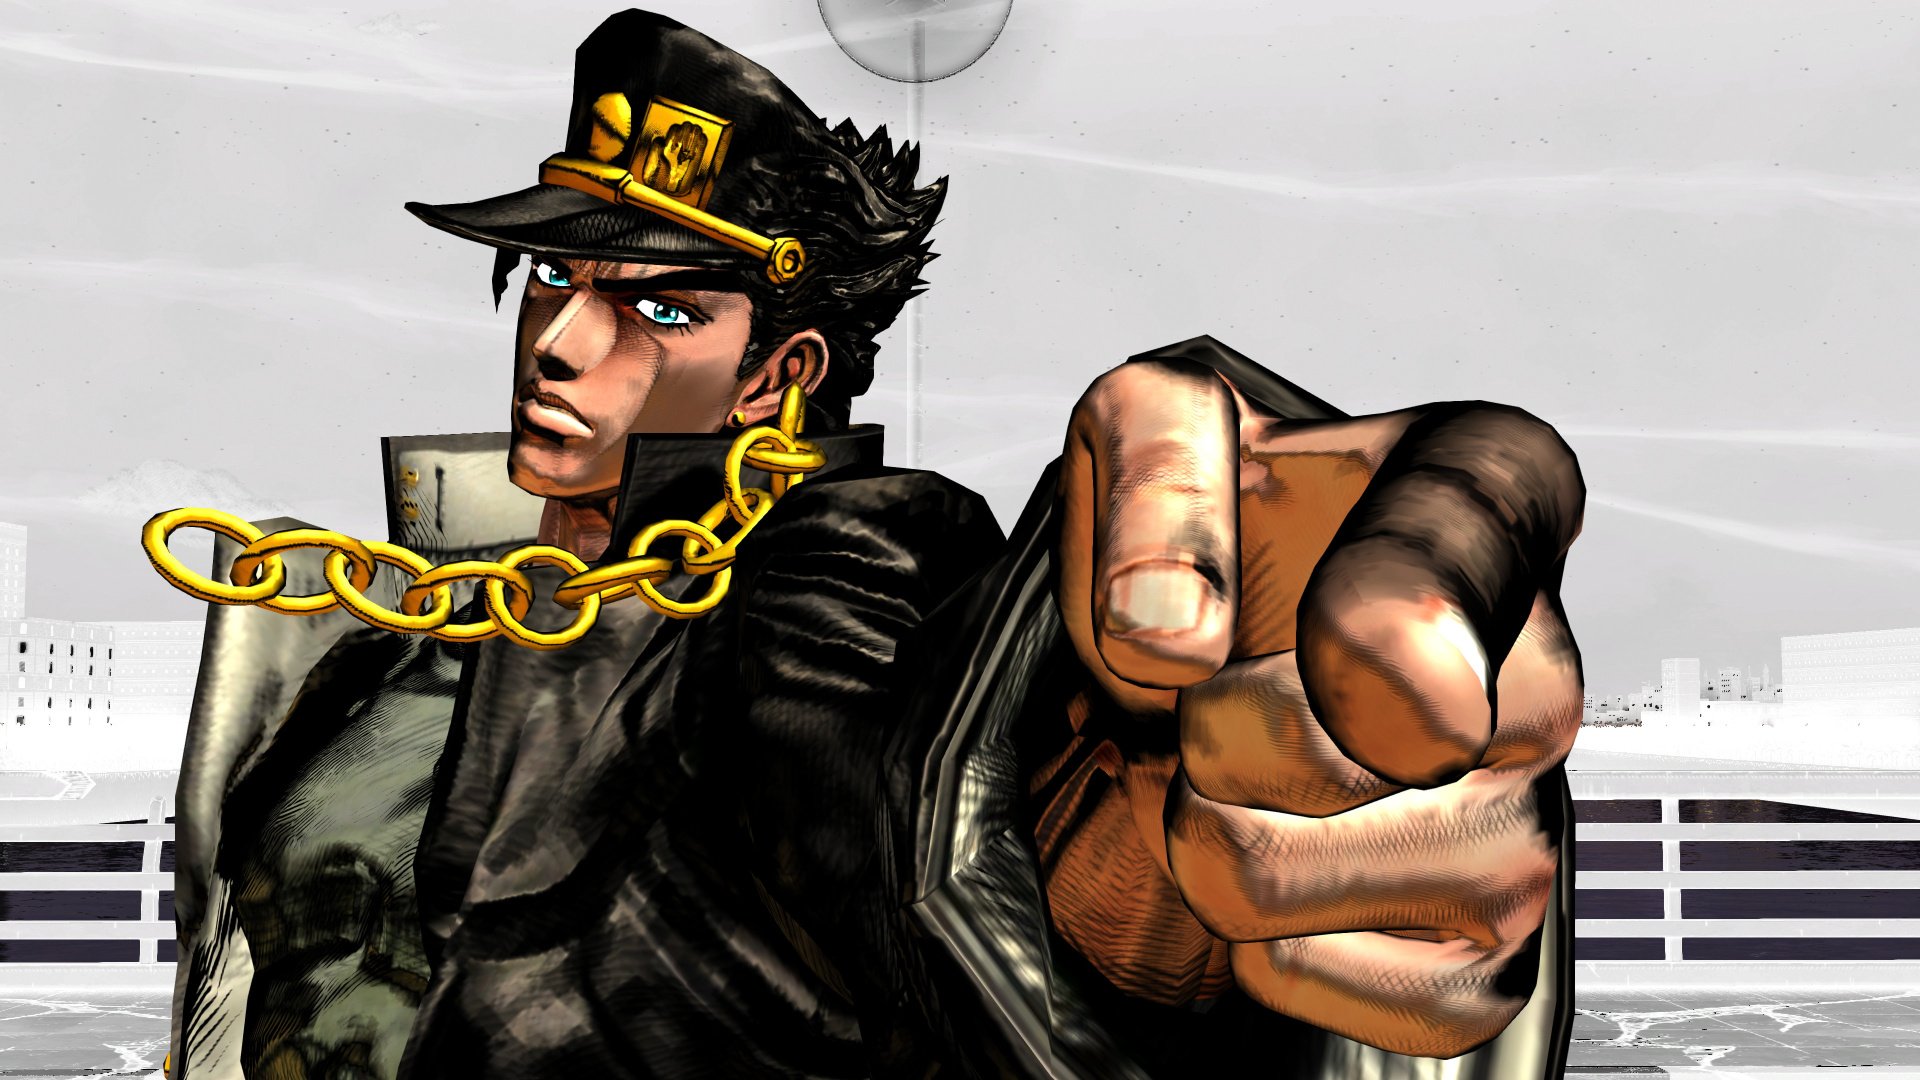 JoJo's Bizarre Adventure HD has been removed from Xbox Live and EU PSN